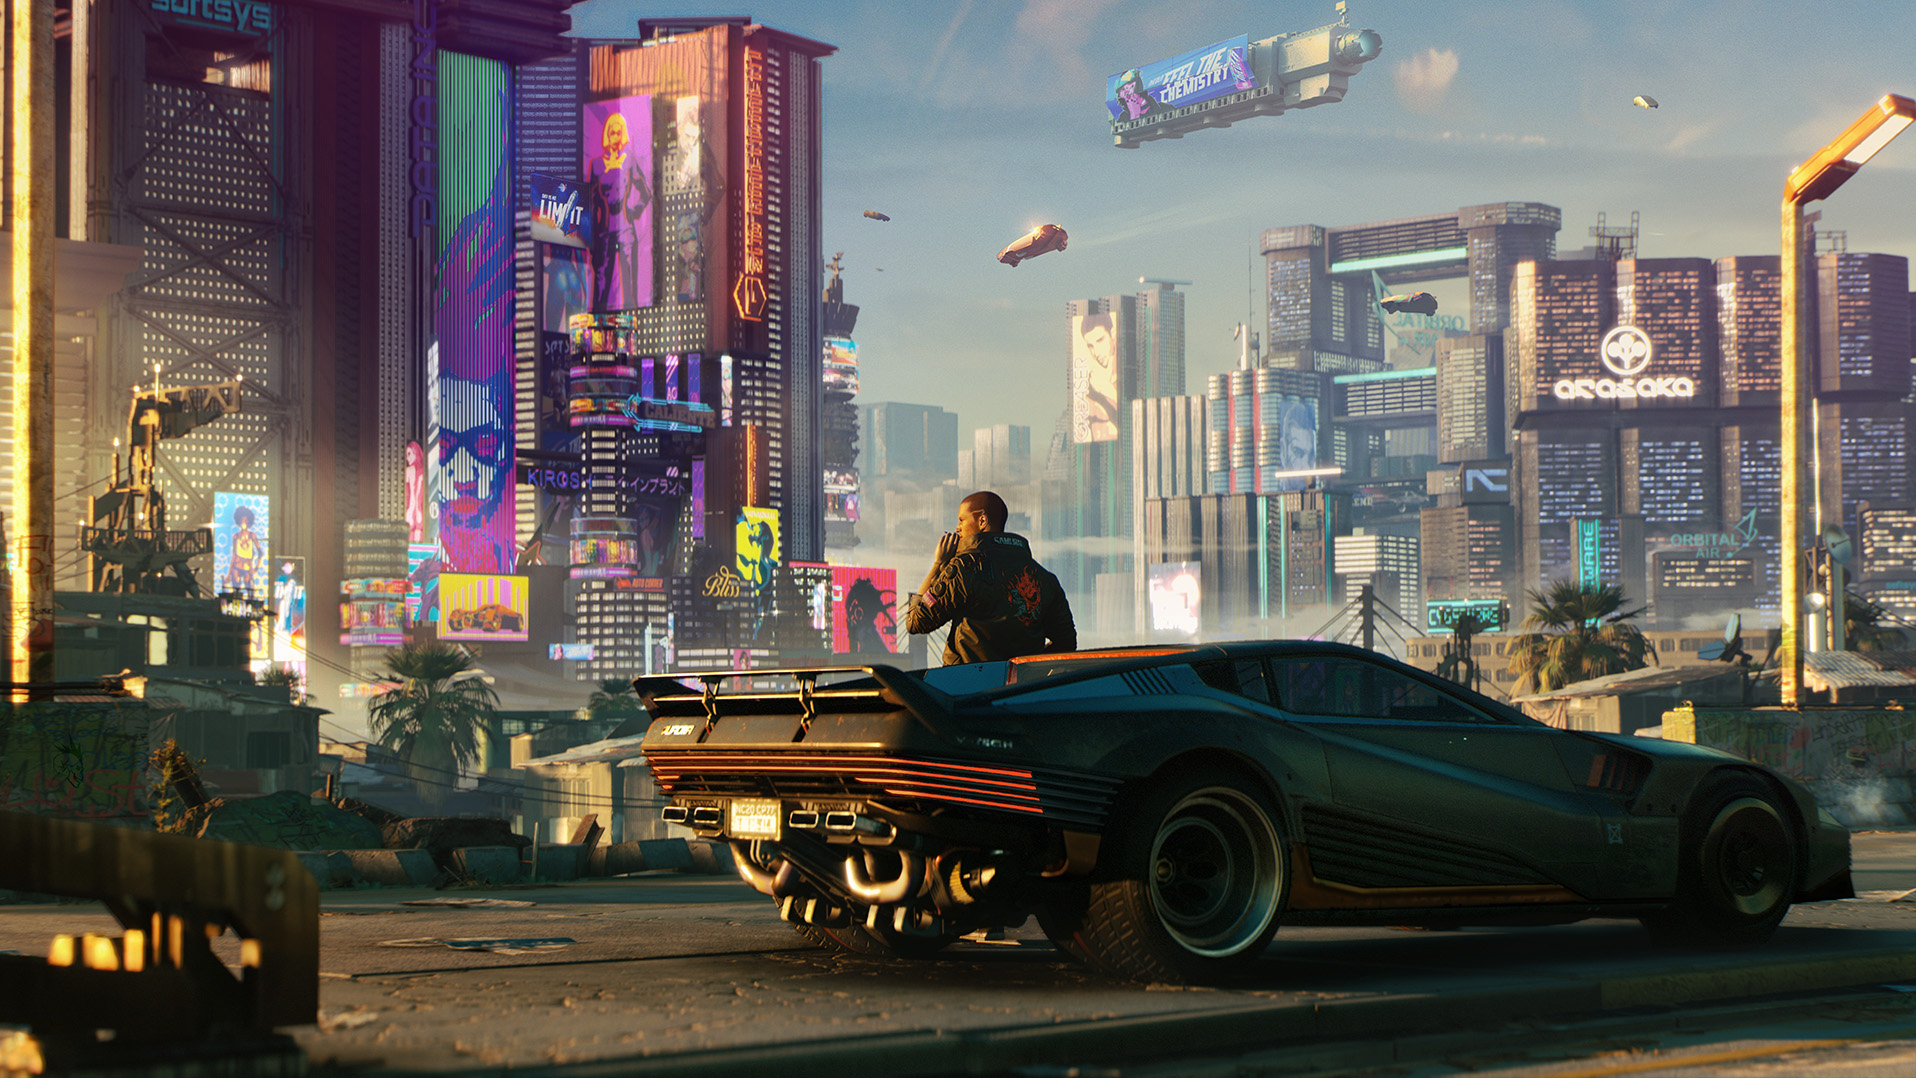 Cyberpunk 2077 will be released on PS4, Xbox One, PC and Google Stadia